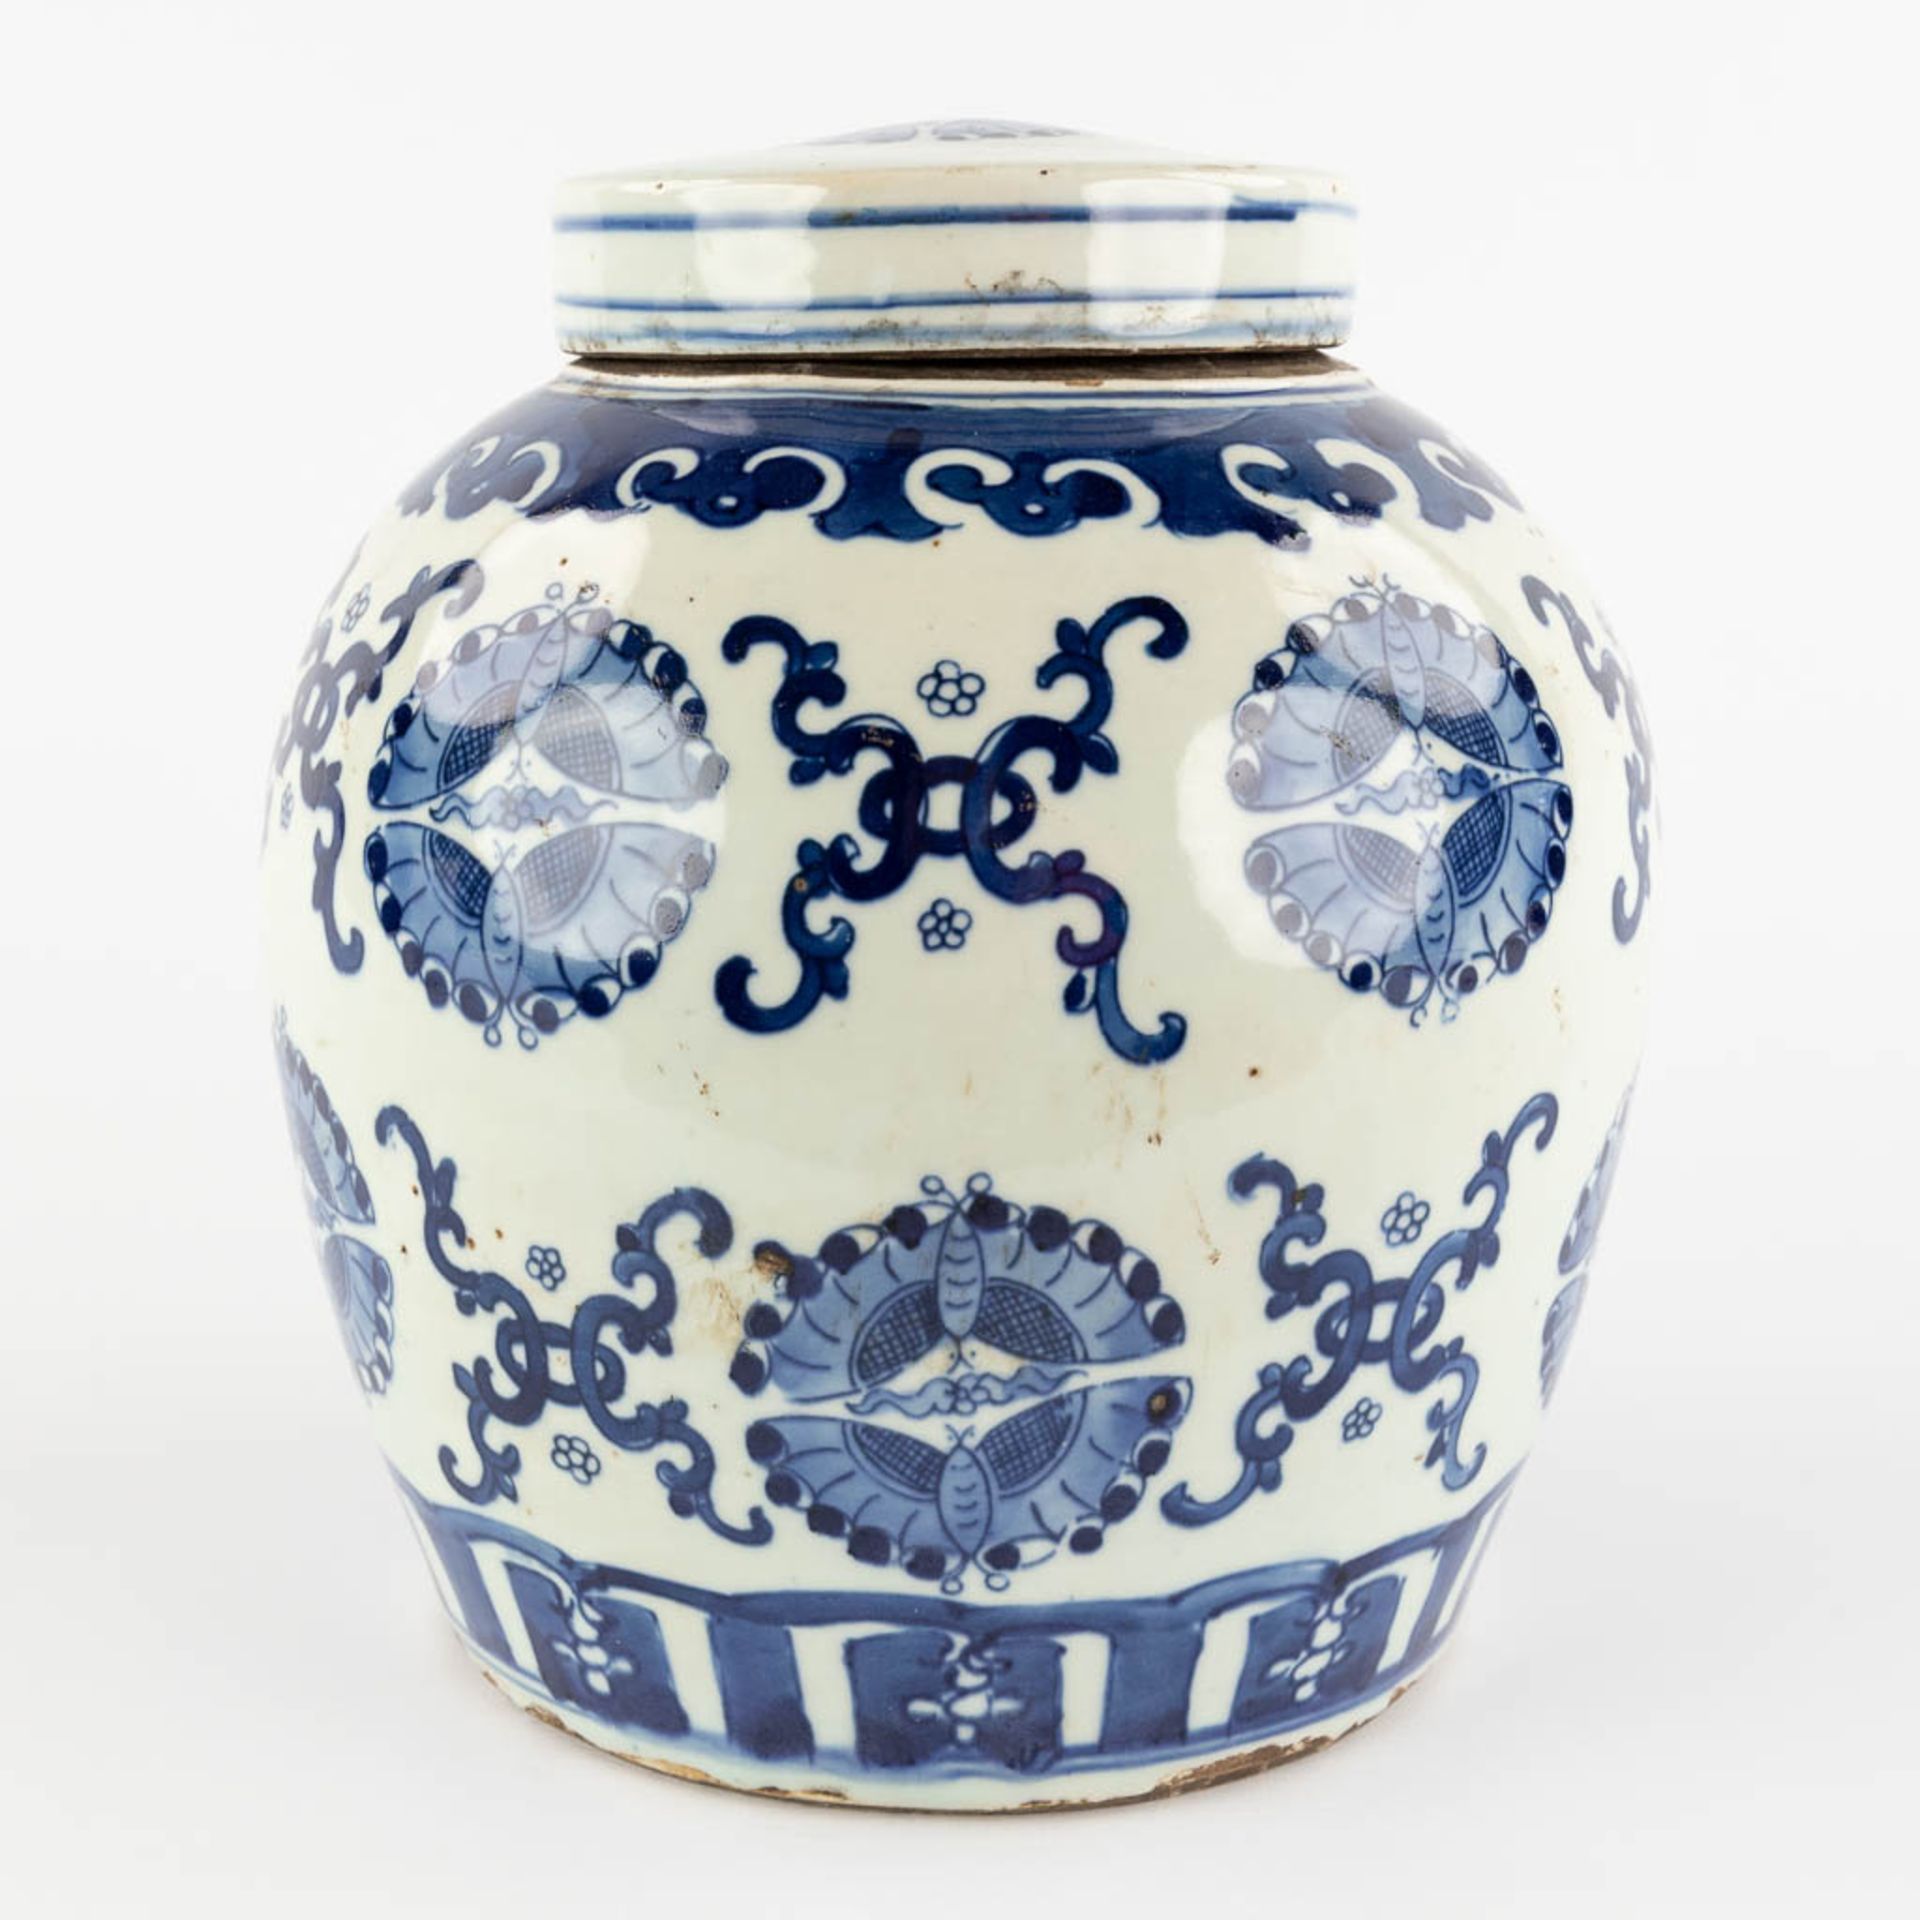 A Chinese ginger jar, decorated with butterflies, export porcelain for the Middle Eastern market. 19